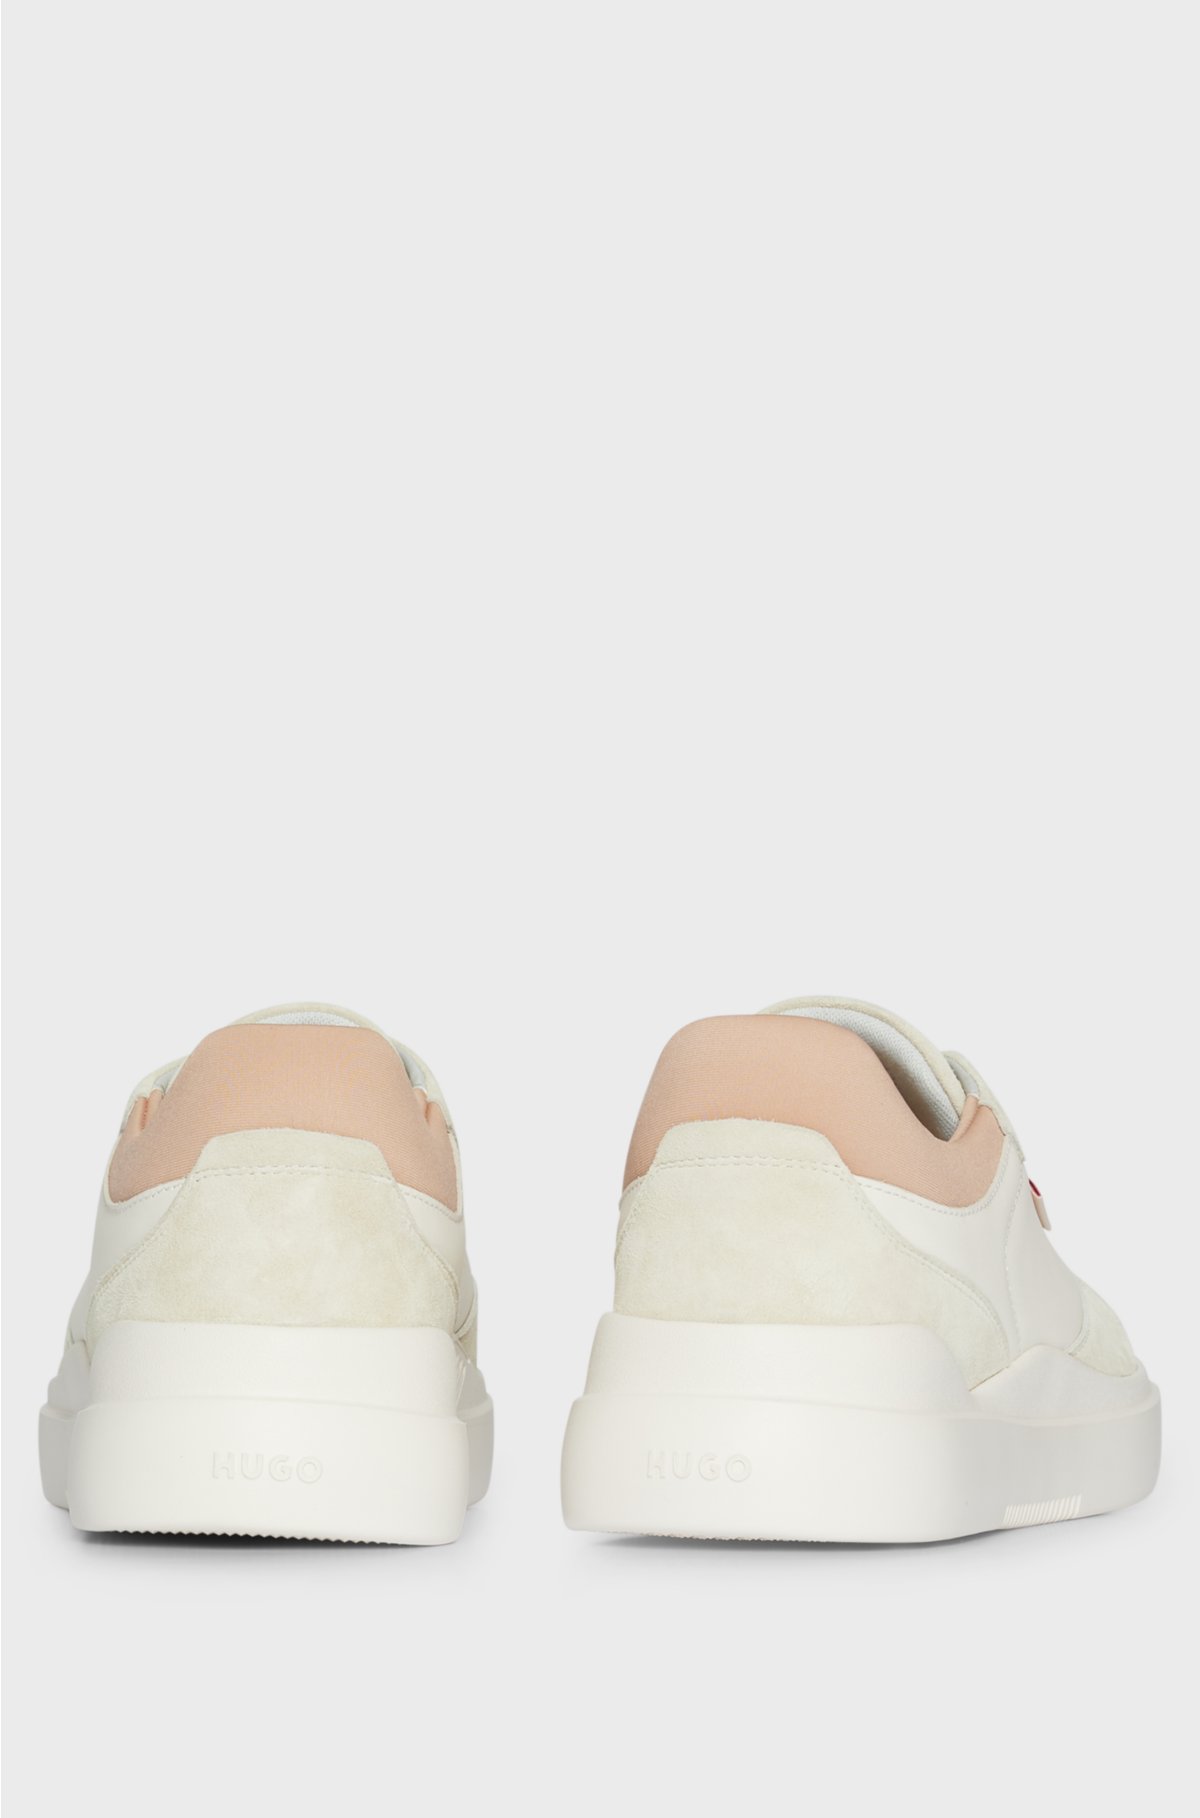 Cupsole-style trainers in leather and suede, White